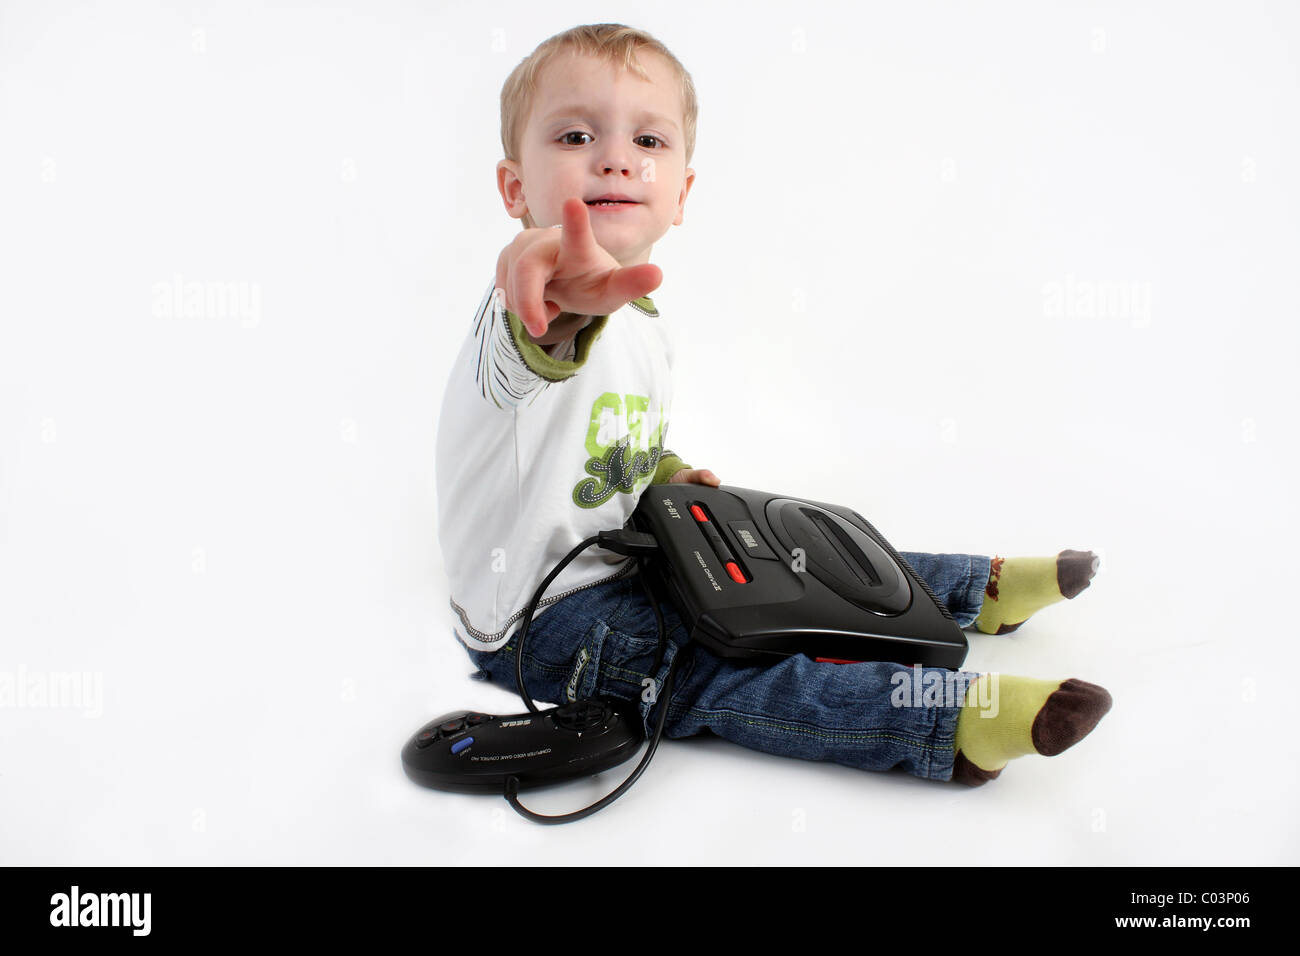 A young toddler boy playing with an old retro gaming video games console system called the Sega Mega Drive 16 Bit edition Stock Photo